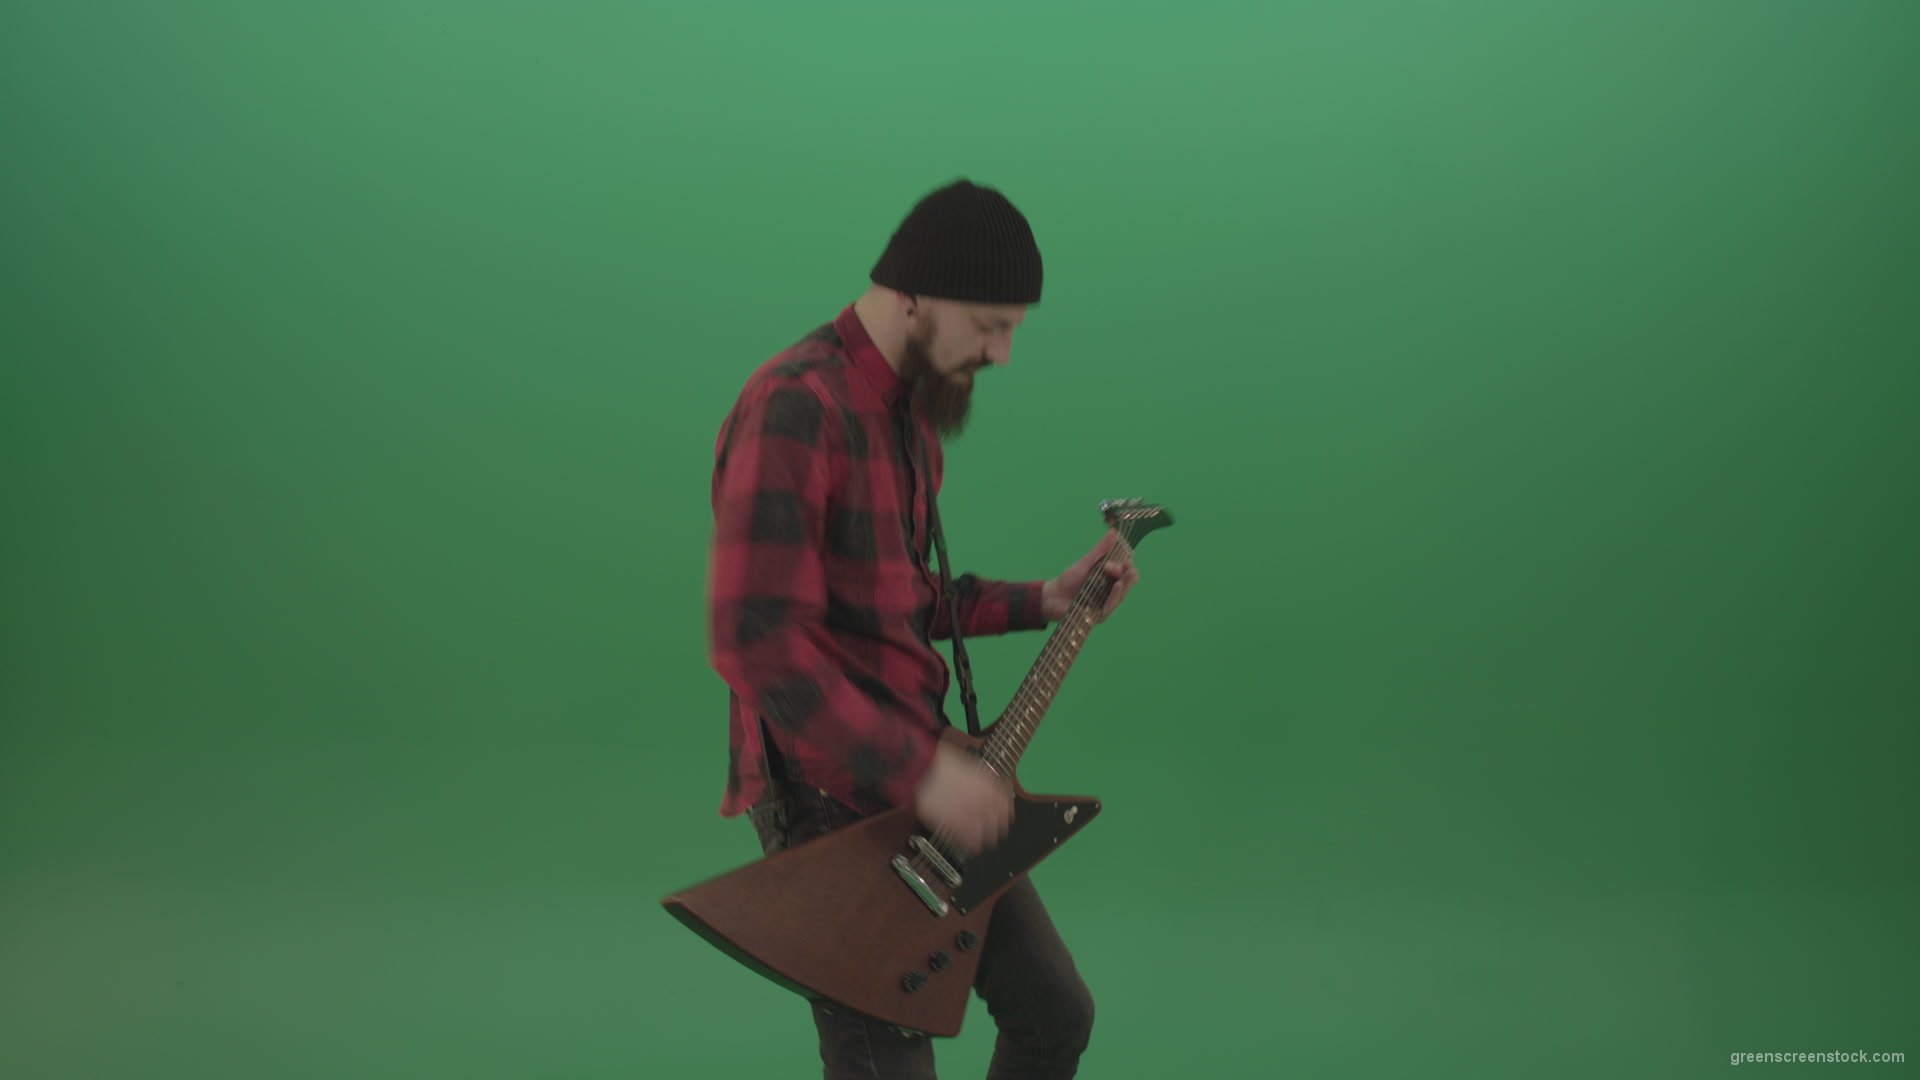 Young-man-with-beard-play-hardcore-music-on-guitar-in-side-view-on-green-screen-chromakey-background_007 Green Screen Stock